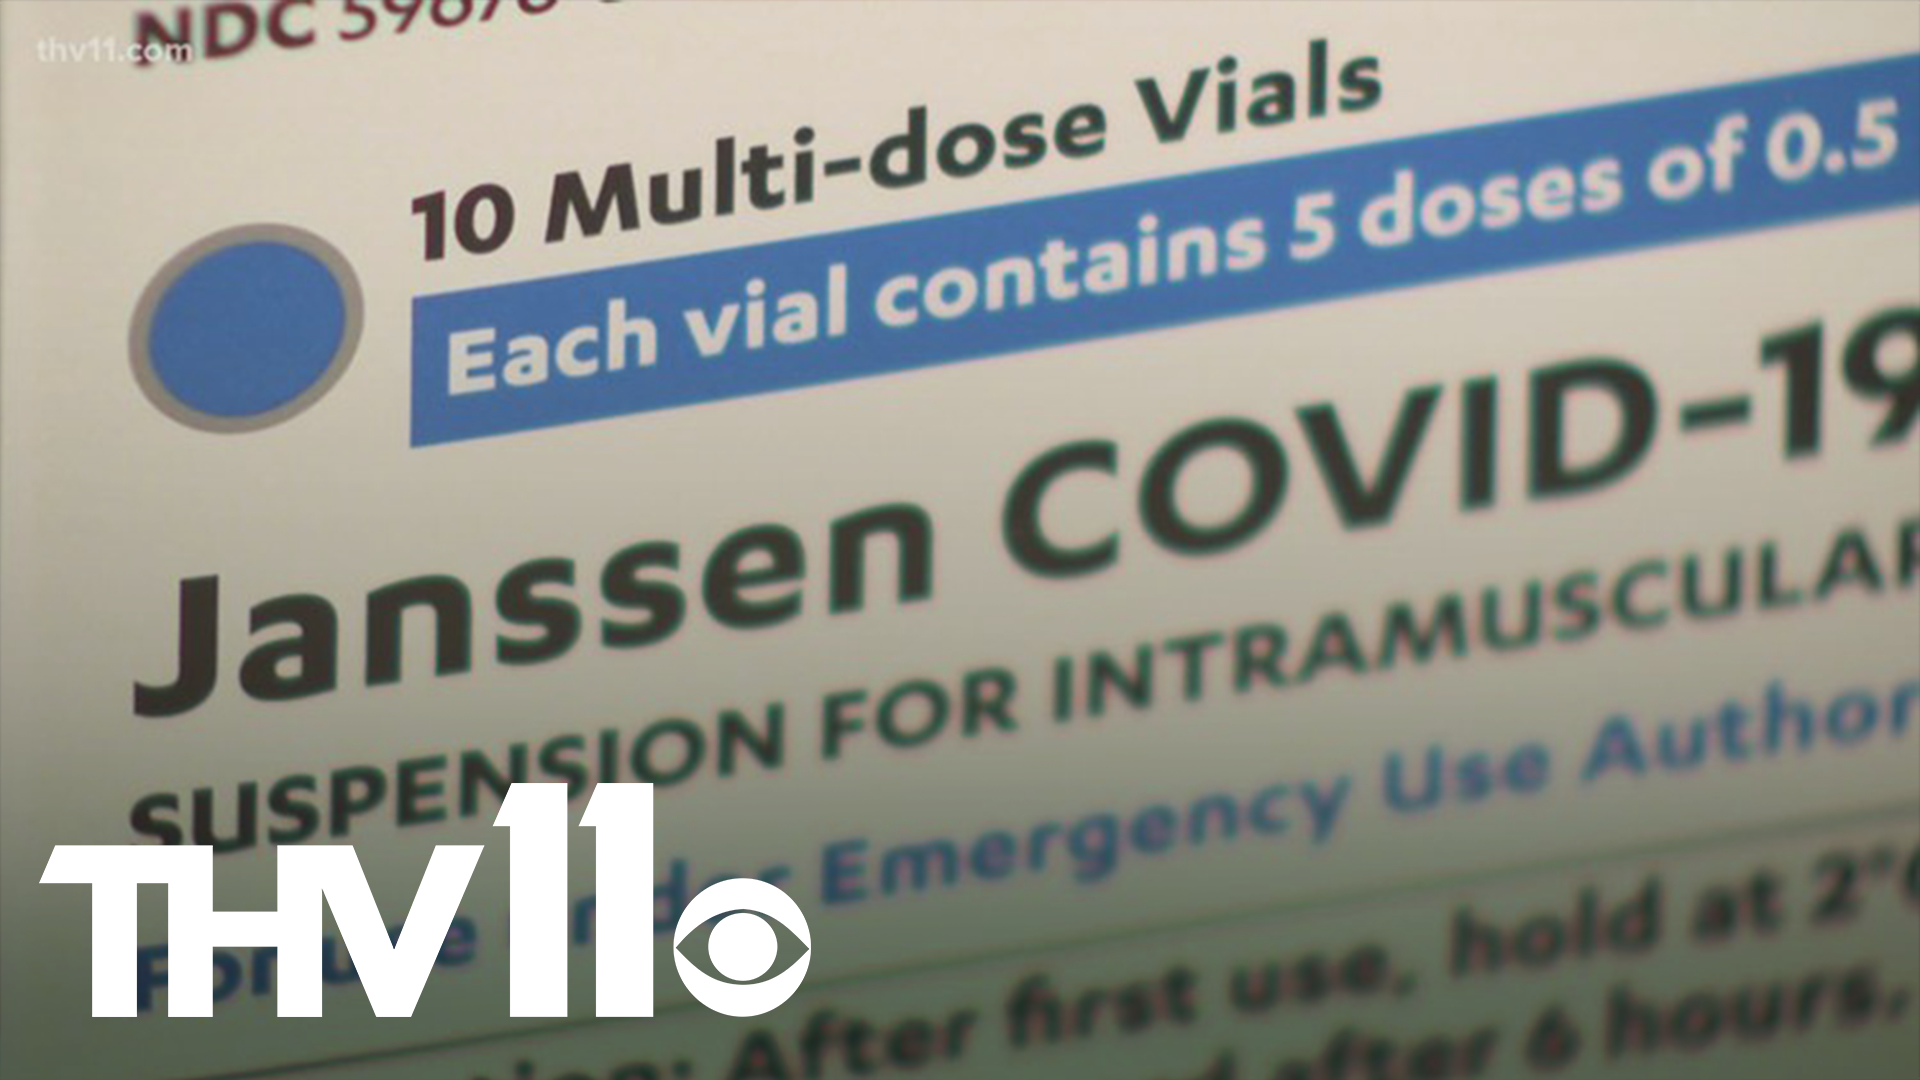 The state has received its first dose of the Johnson & Johnson COVID-19 vaccine. Two Arkansas pharmacies are putting their portion into vials now.